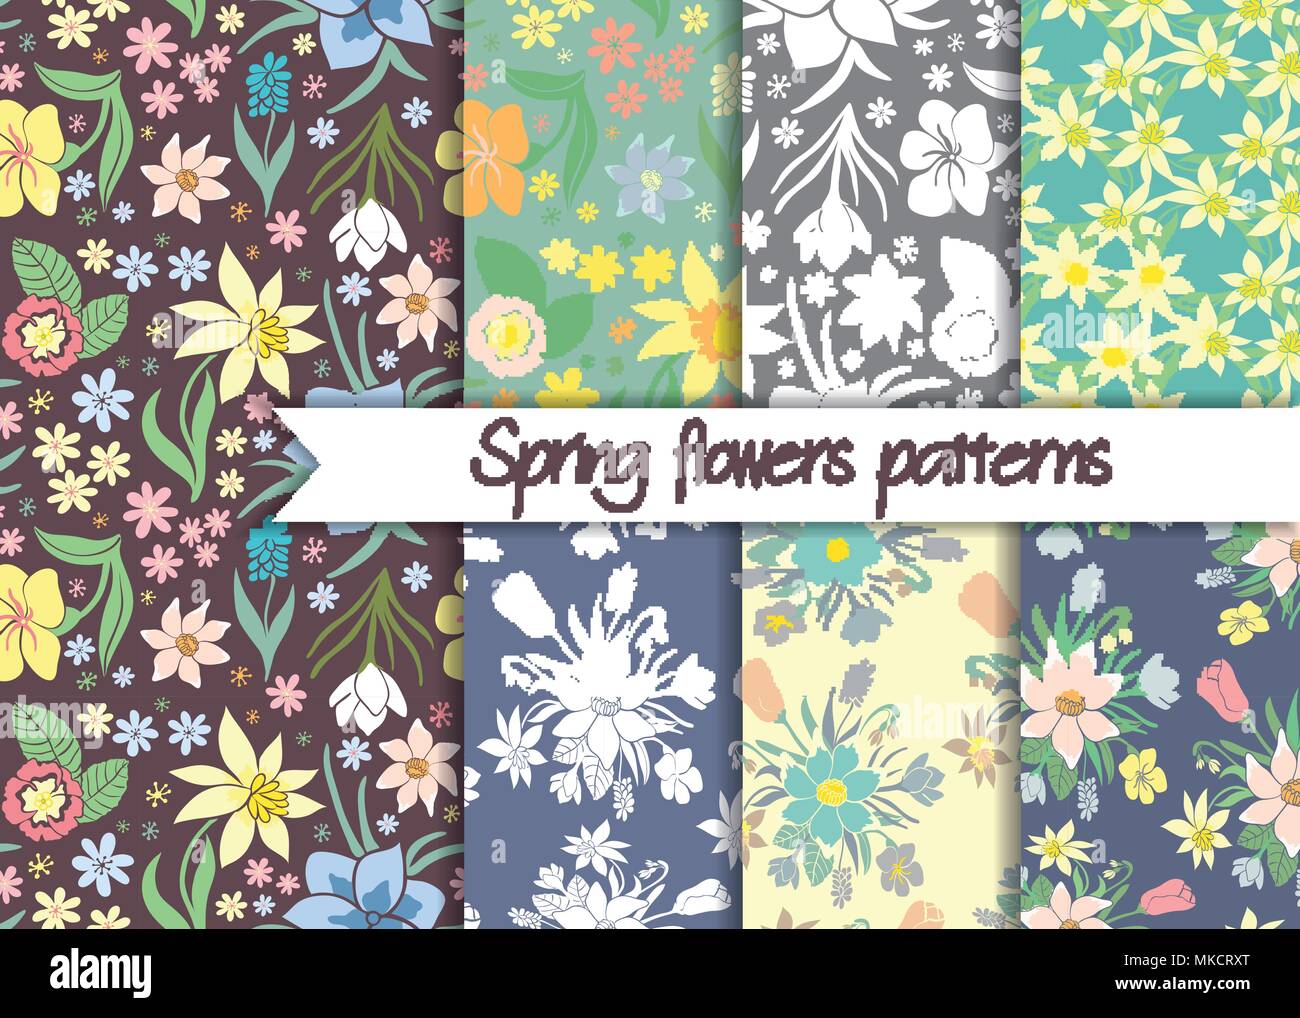 Spring flowers patterns. Set of seamless colorful vector patterns.Floral patterns. Floral seamless vector patterns. Vector floral backgrounds. Set of  Stock Vector